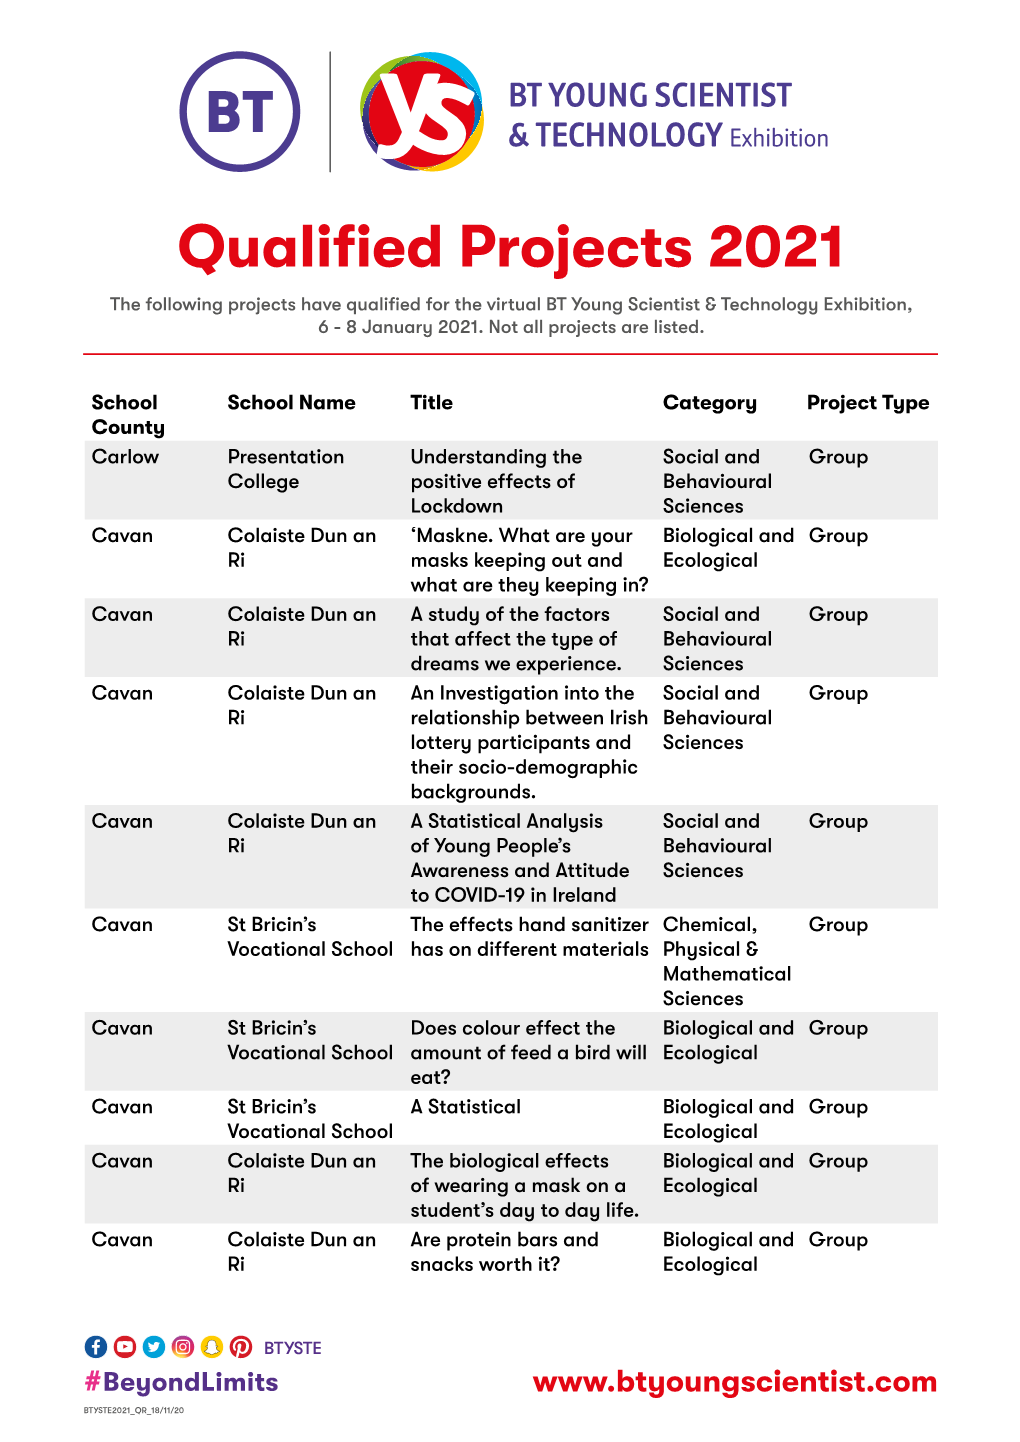 Qualified Projects 2021 the Following Projects Have Qualified for the Virtual BT Young Scientist & Technology Exhibition, 6 - 8 January 2021